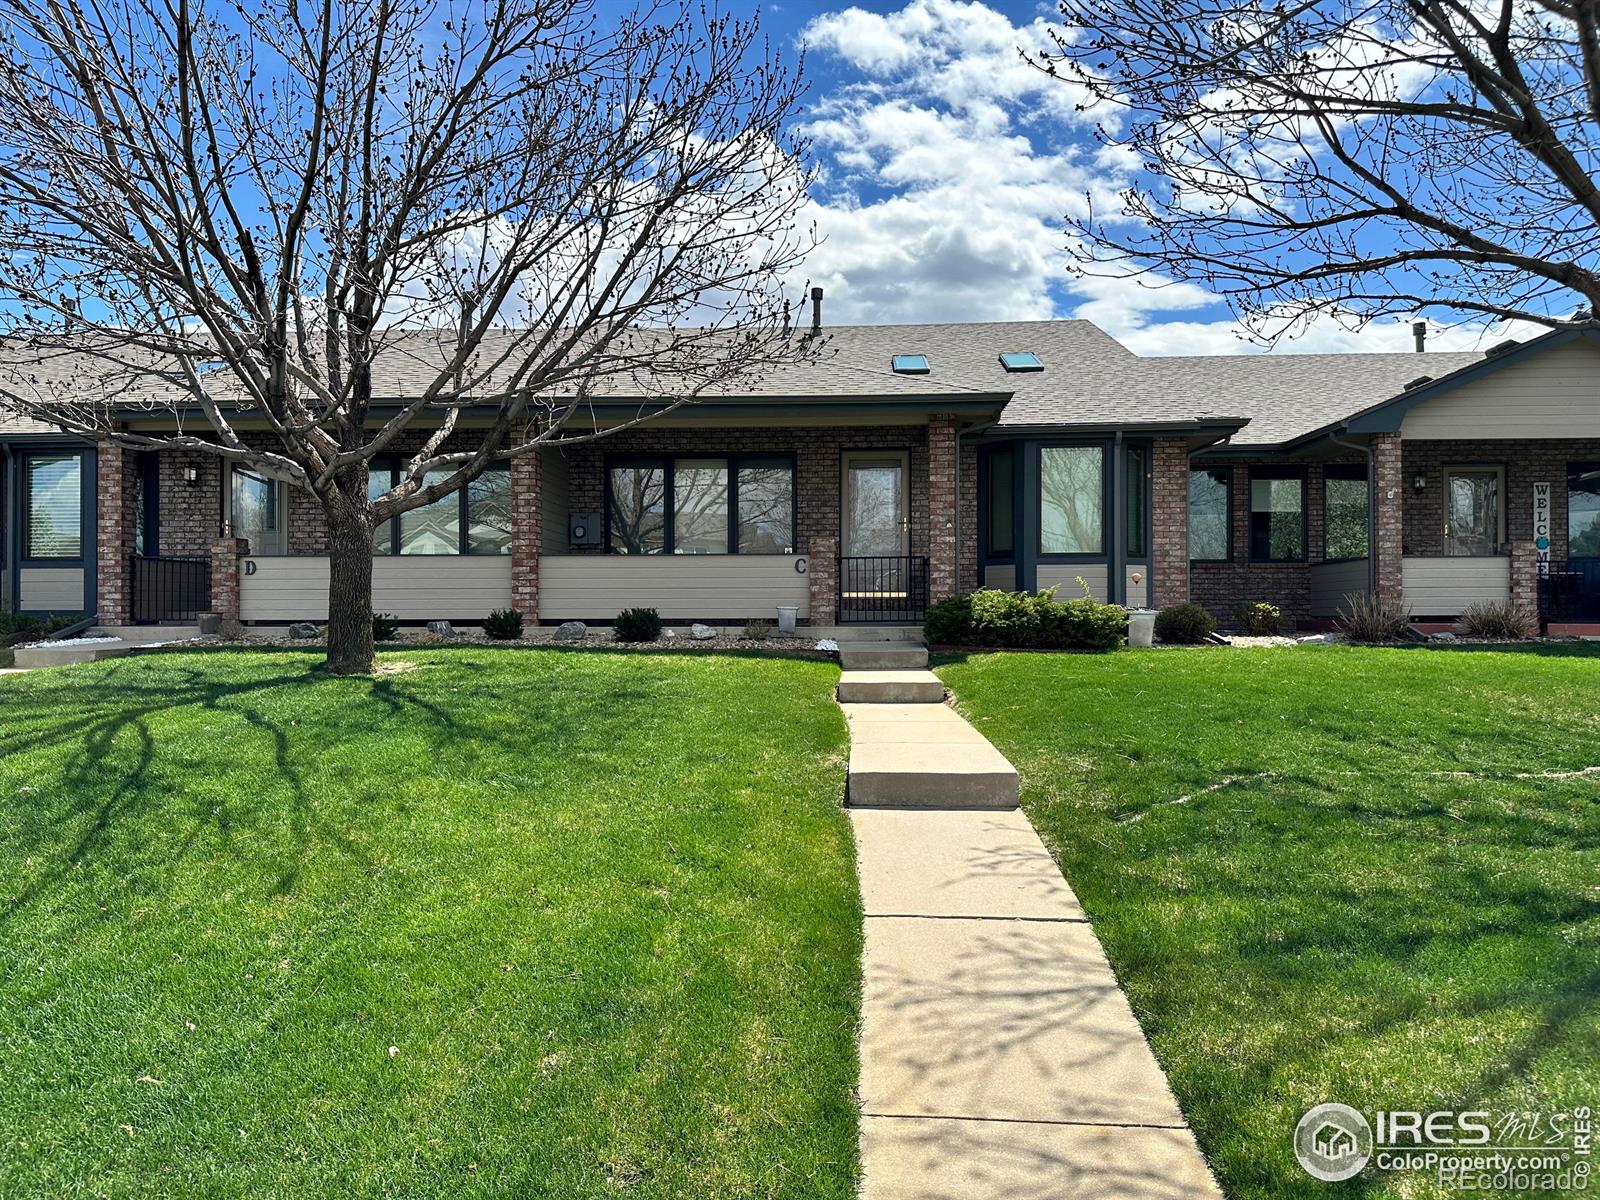 4652 W 21st St Rd, greeley MLS: 4567891008770 Beds: 4 Baths: 3 Price: $435,000